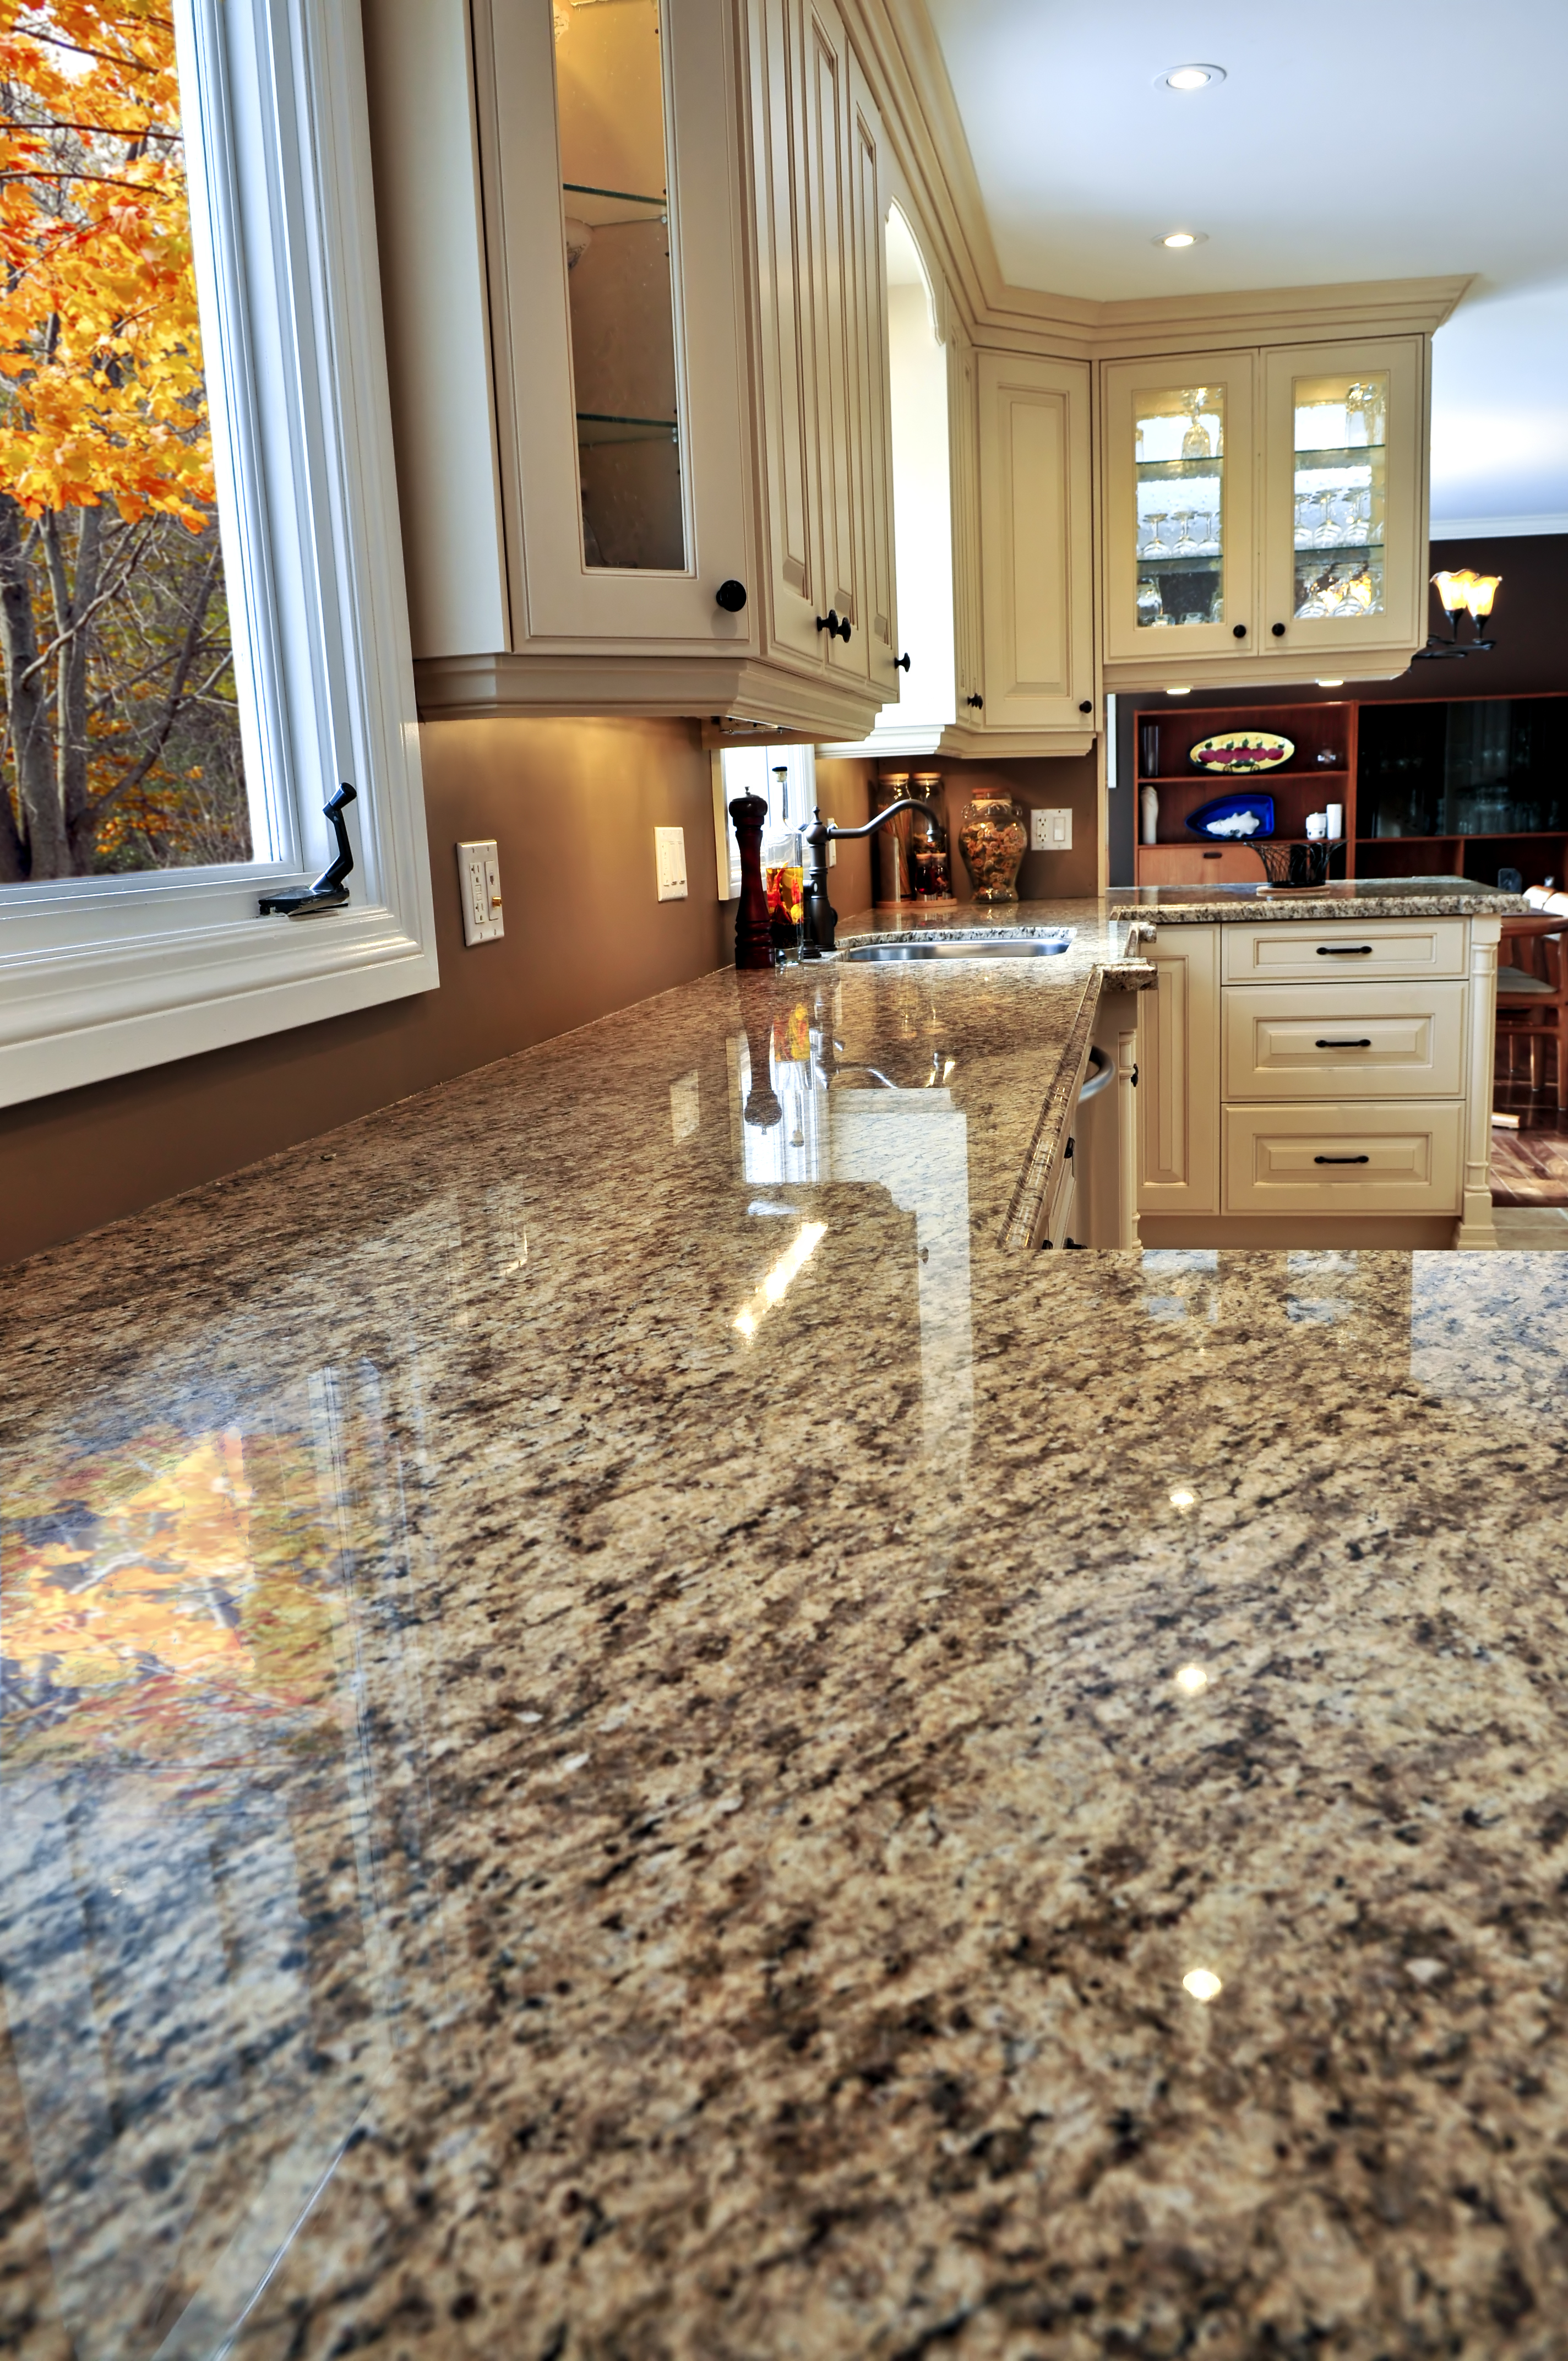 7 Common Kitchen Countertop Problems, How To Fill Gaps In Granite Countertop